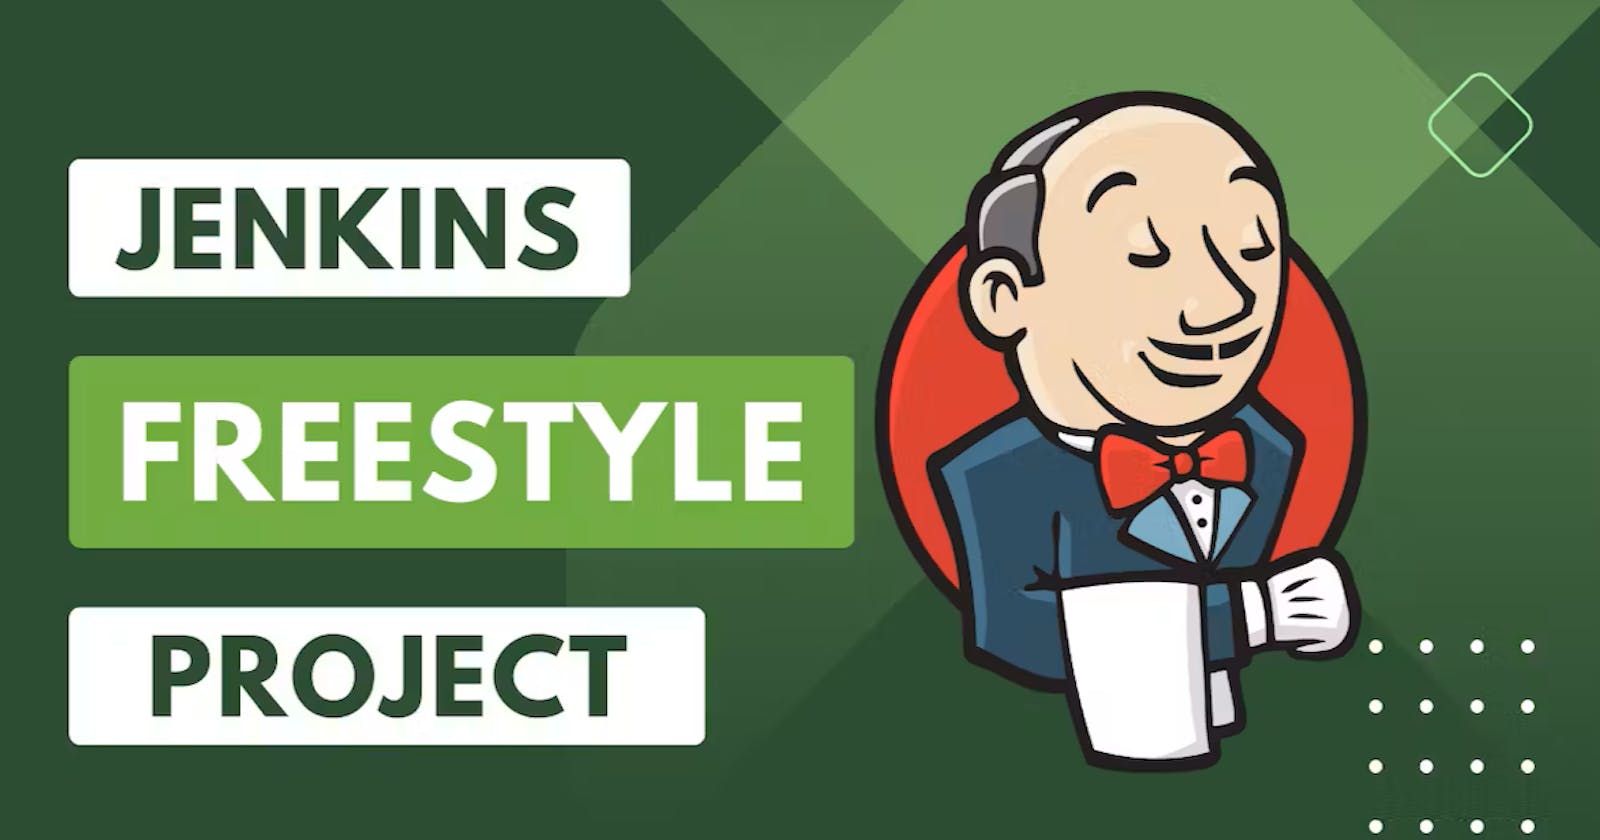 🛠️Day 23 - Jenkins Freestyle Project for DevOps Engineers